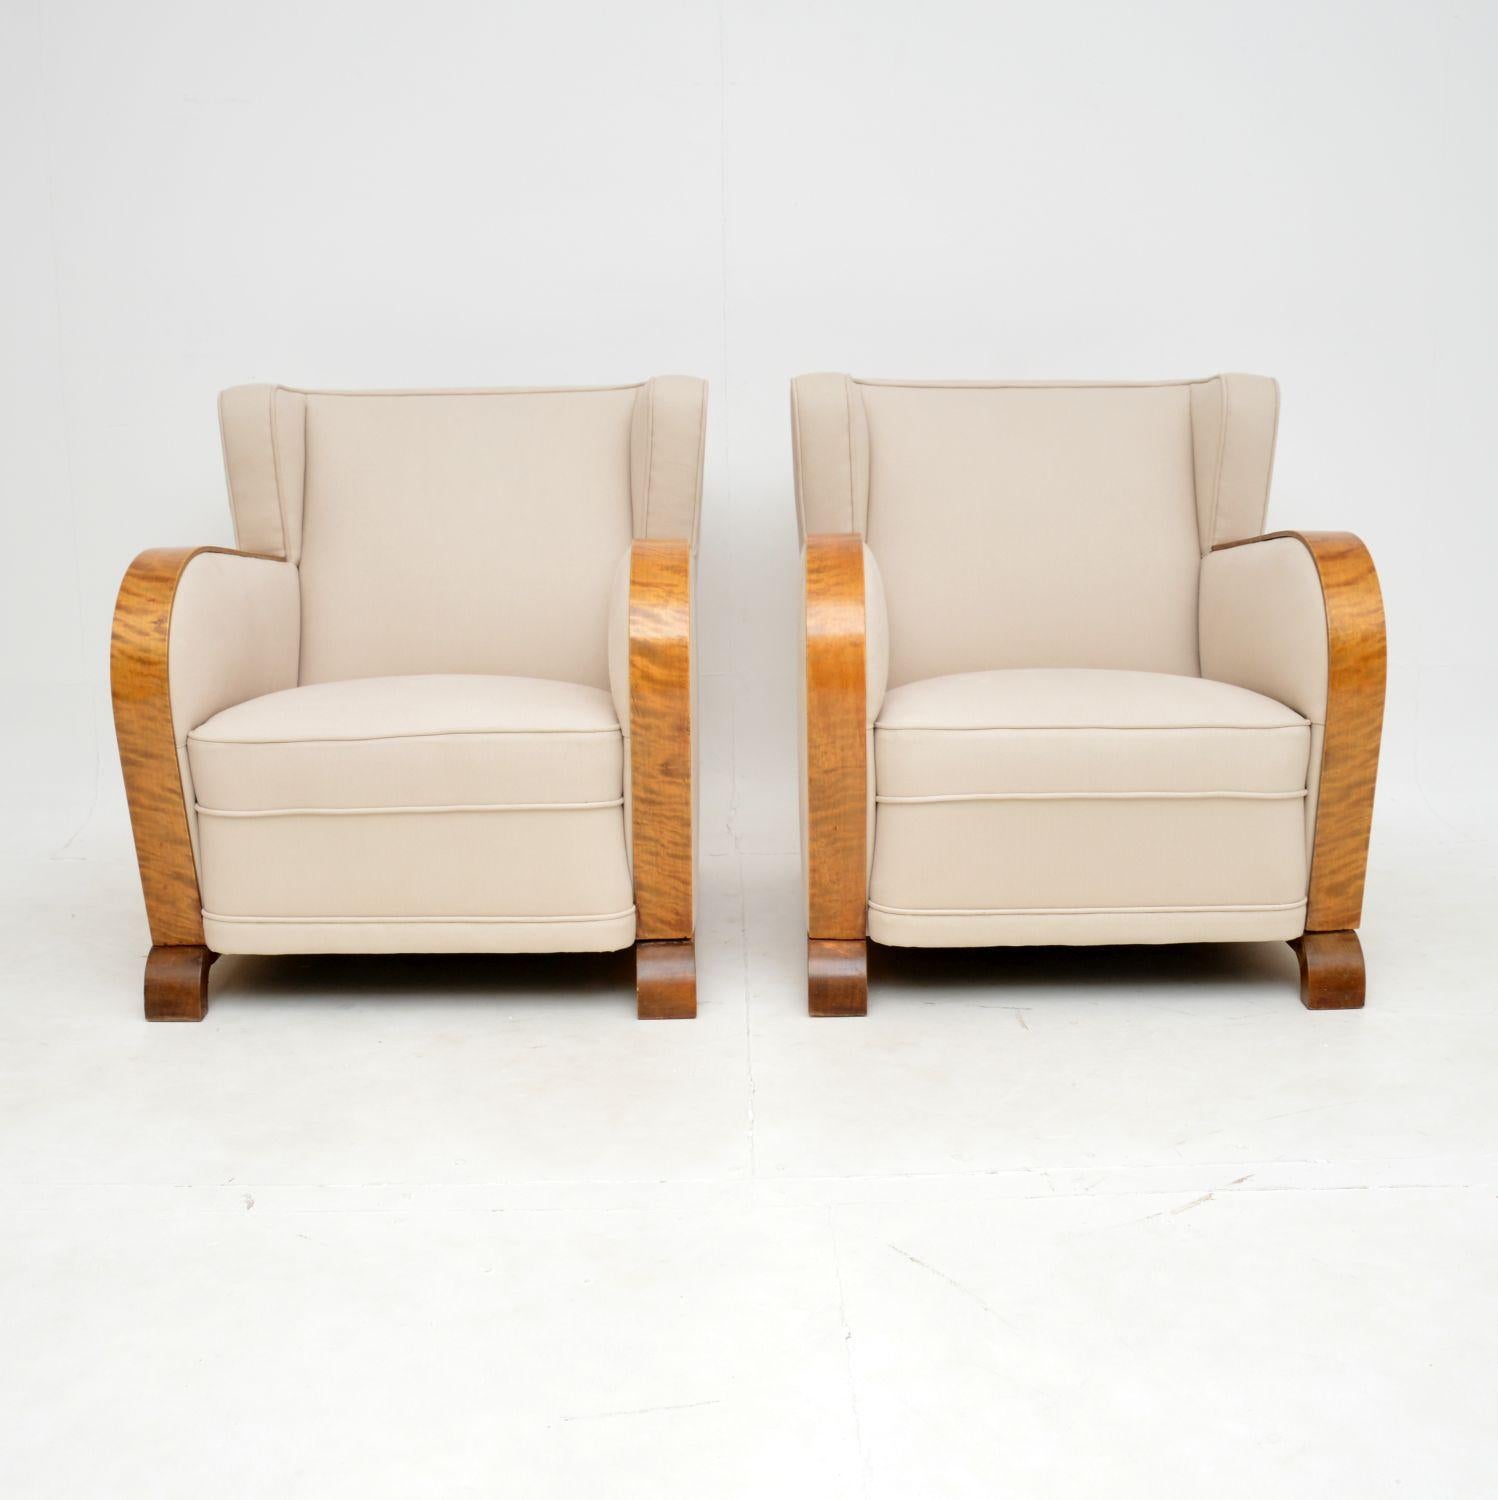 A superb pair of original Art Deco period armchairs in satin birch. We brought these over from Sweden, however, we believe they were made in Finland, and they date from the 1920-30’s period.

The quality is outstanding, they are an impressive size